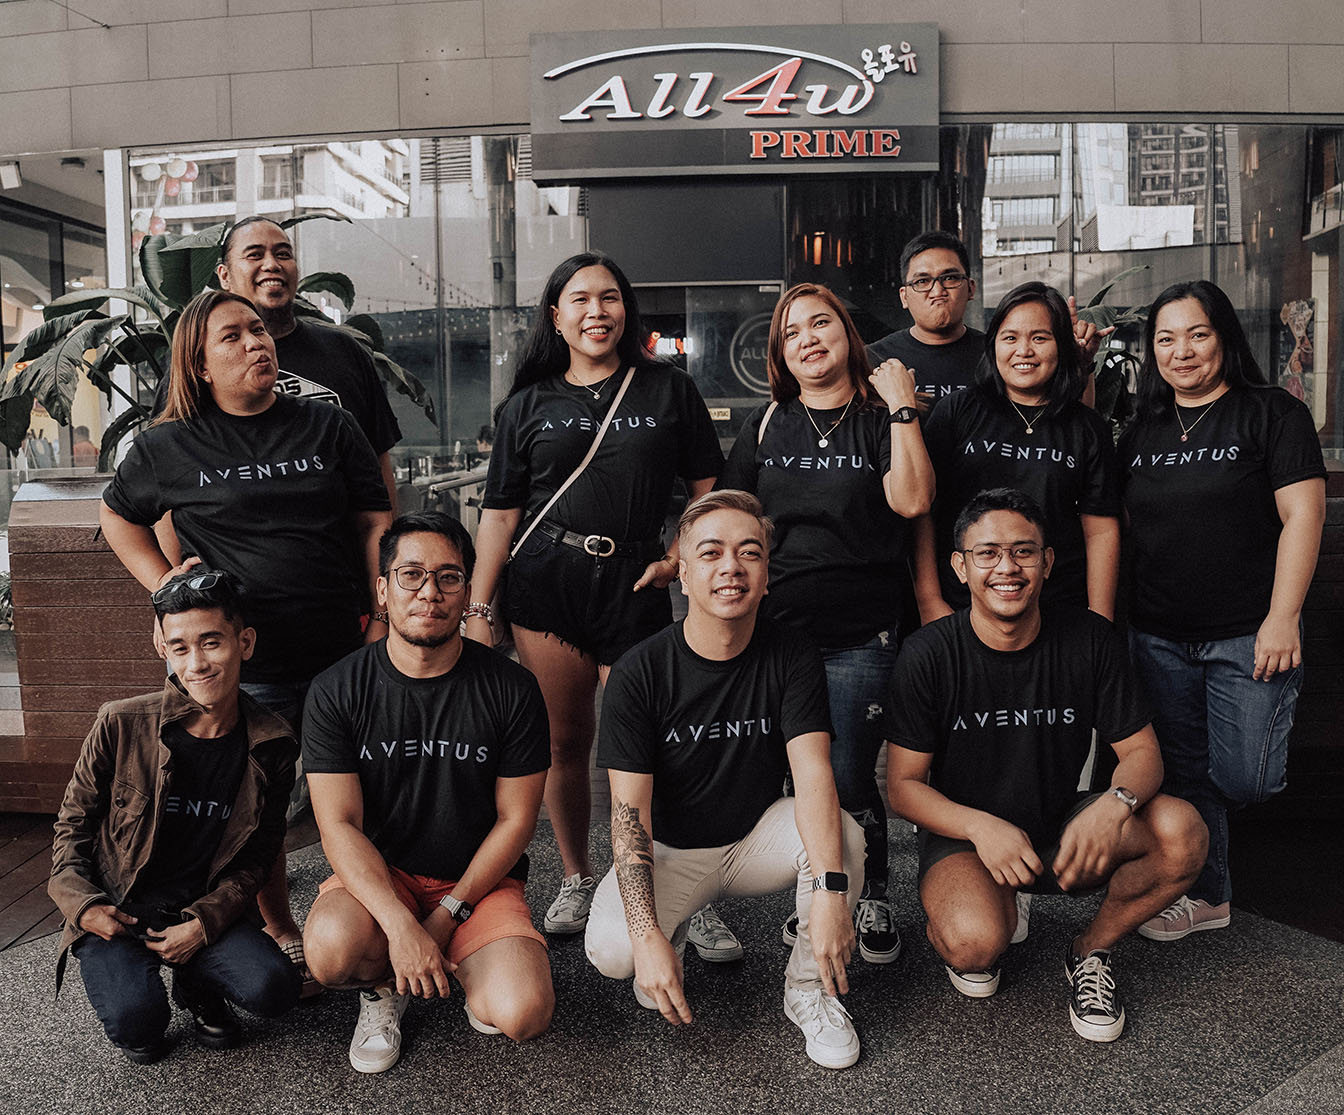 Some members from the Aventus Philippines team posing in front of a restaurant